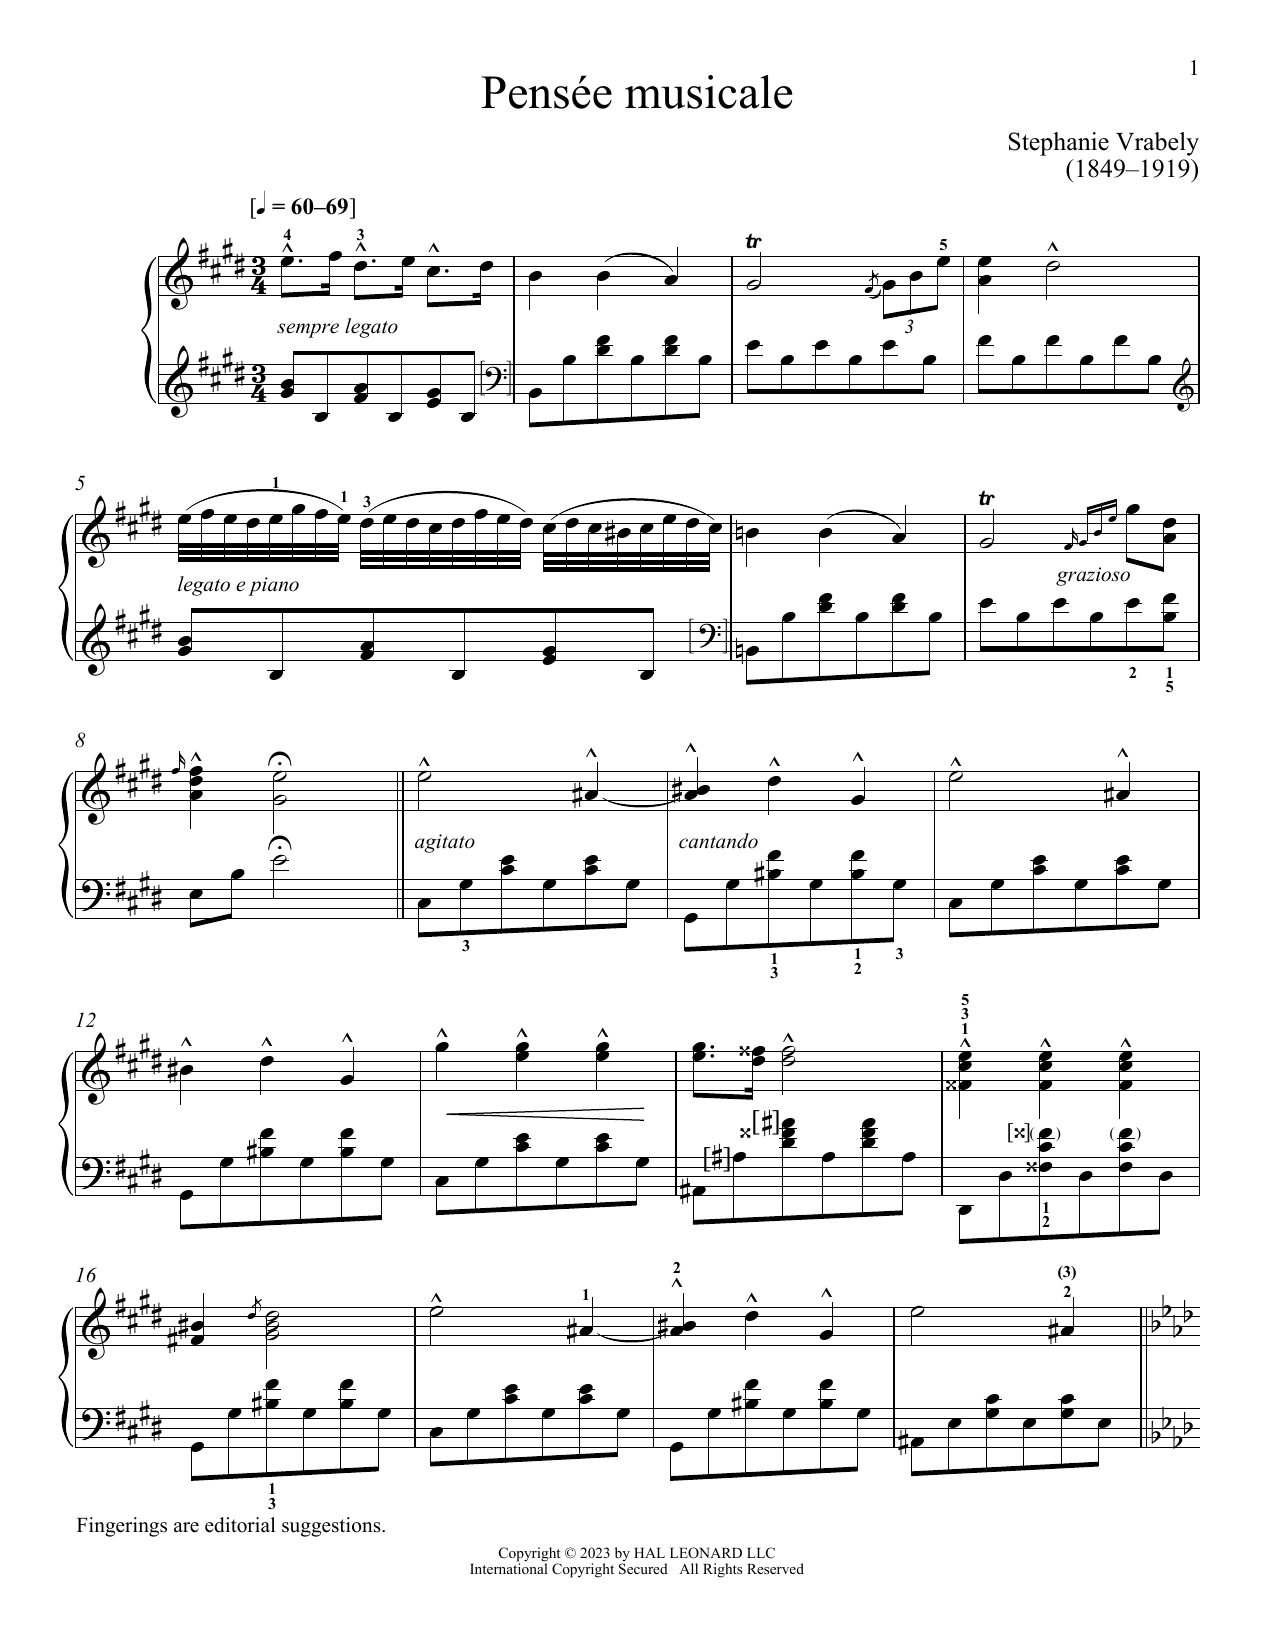 Download Stephanie Vrabley Pensee musicale Sheet Music